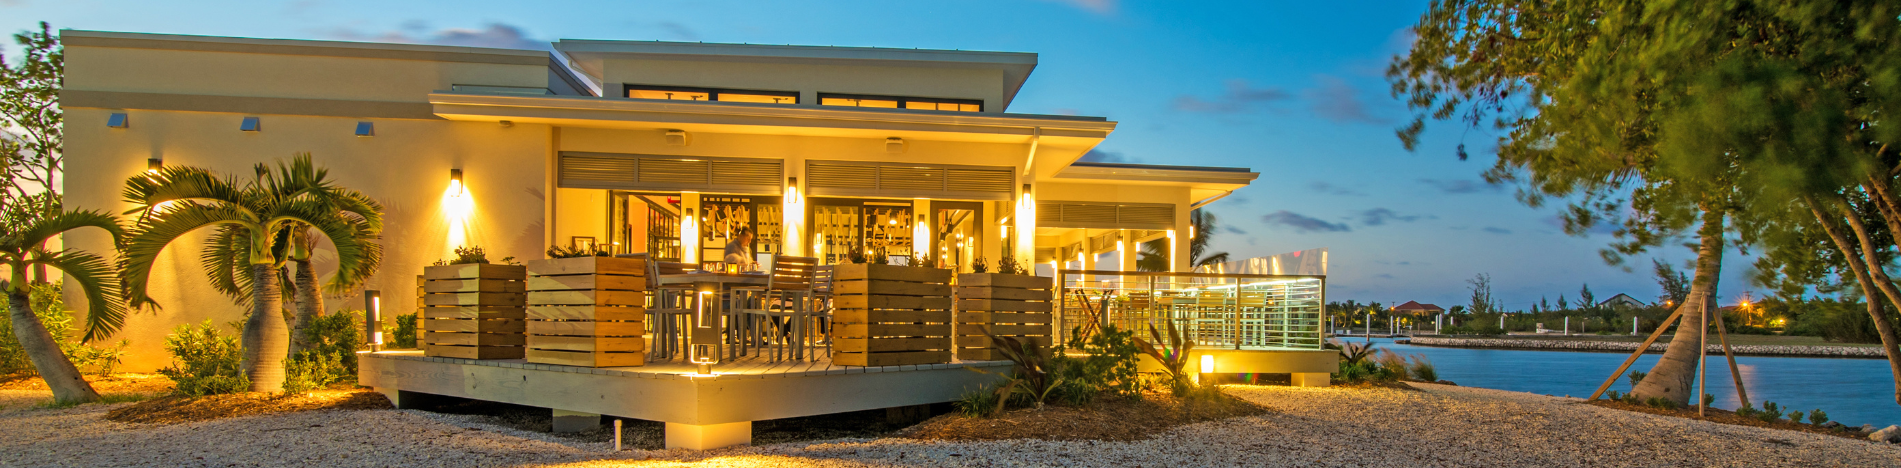 6 Gastro Must-Do's in The Cayman Islands